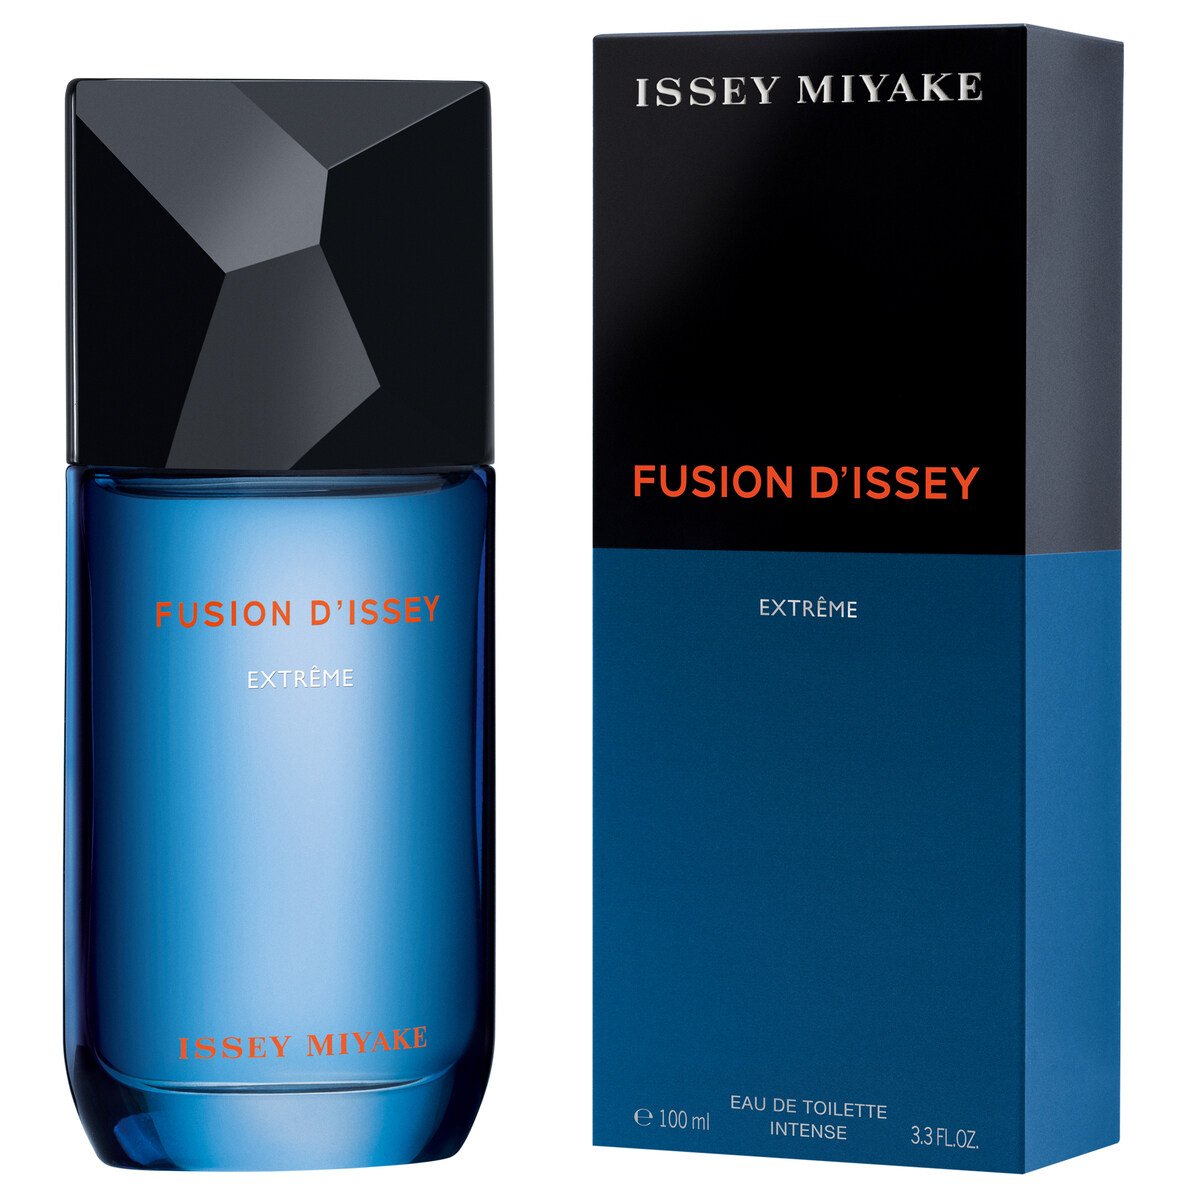 Issey Miyake Fusion D'Issey Extreme For Men Eau De Toilette Intense 100Ml Tester